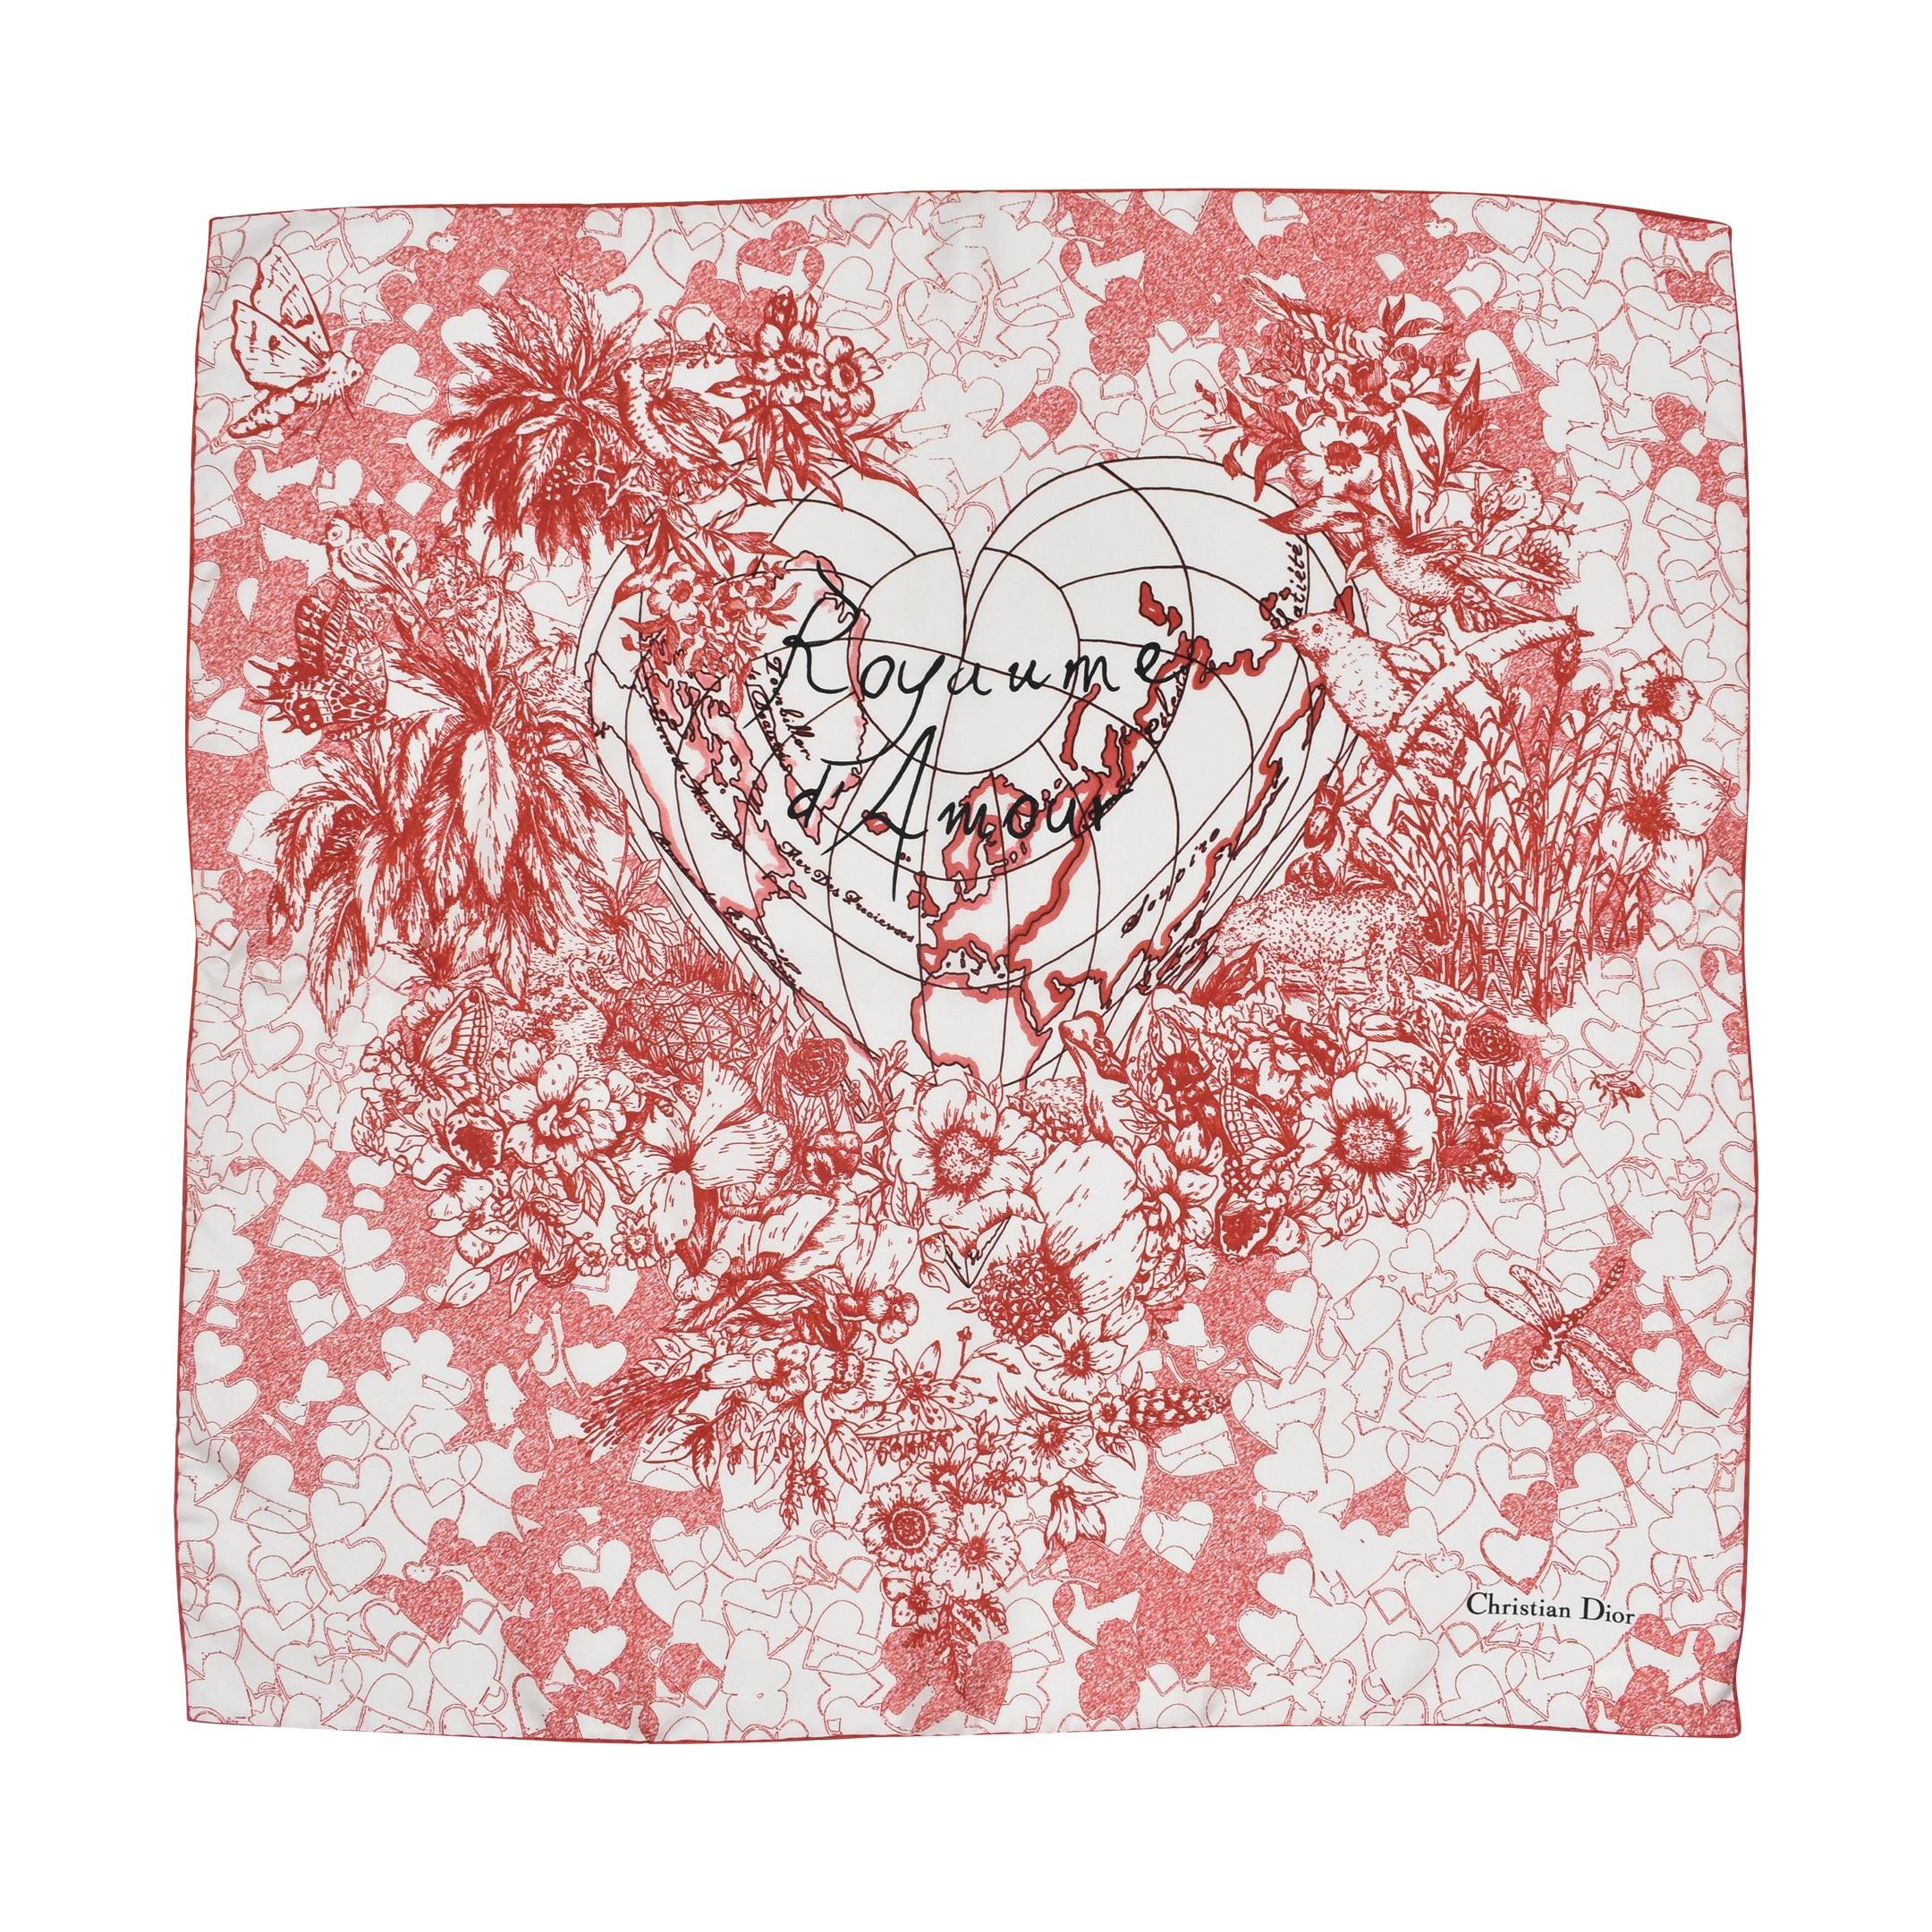 Christian Dior 'Royaume d'Amour' Scarf - Fashionably Yours